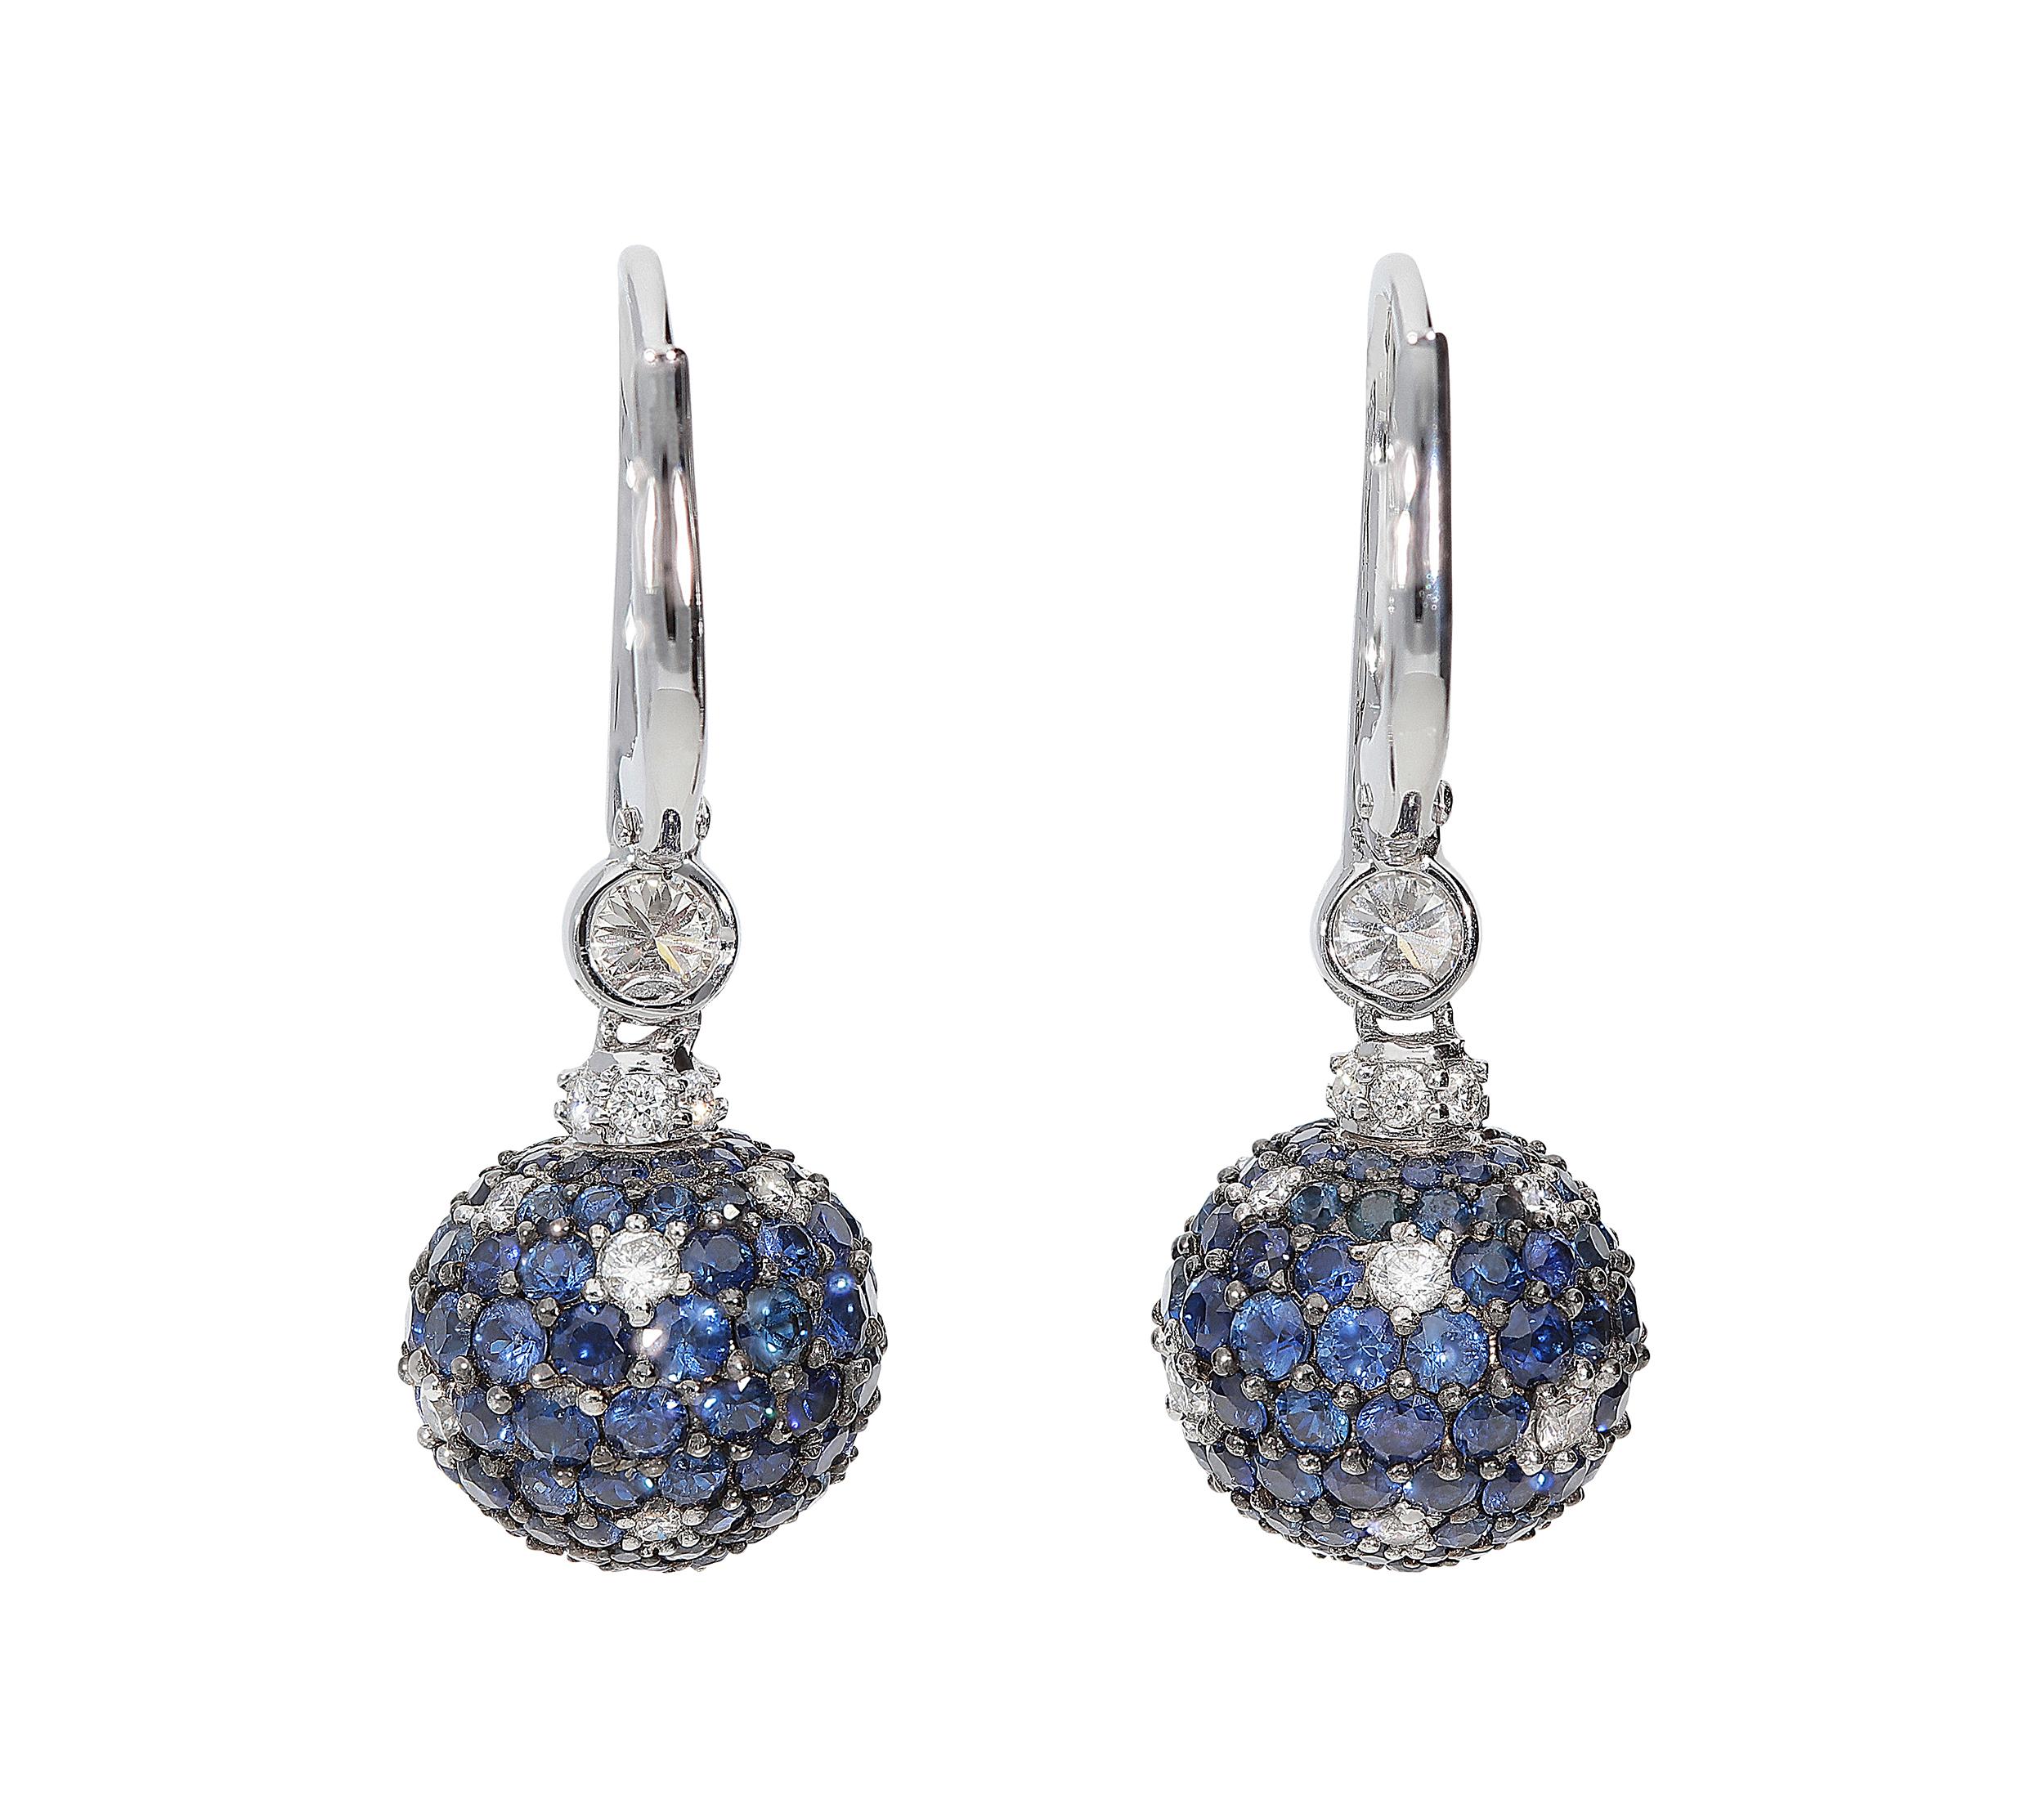 0.84 White GVS Diamonds 4.24 Blu Sapphires 18 Karat Gold White Earrings In New Condition For Sale In Valenza, IT